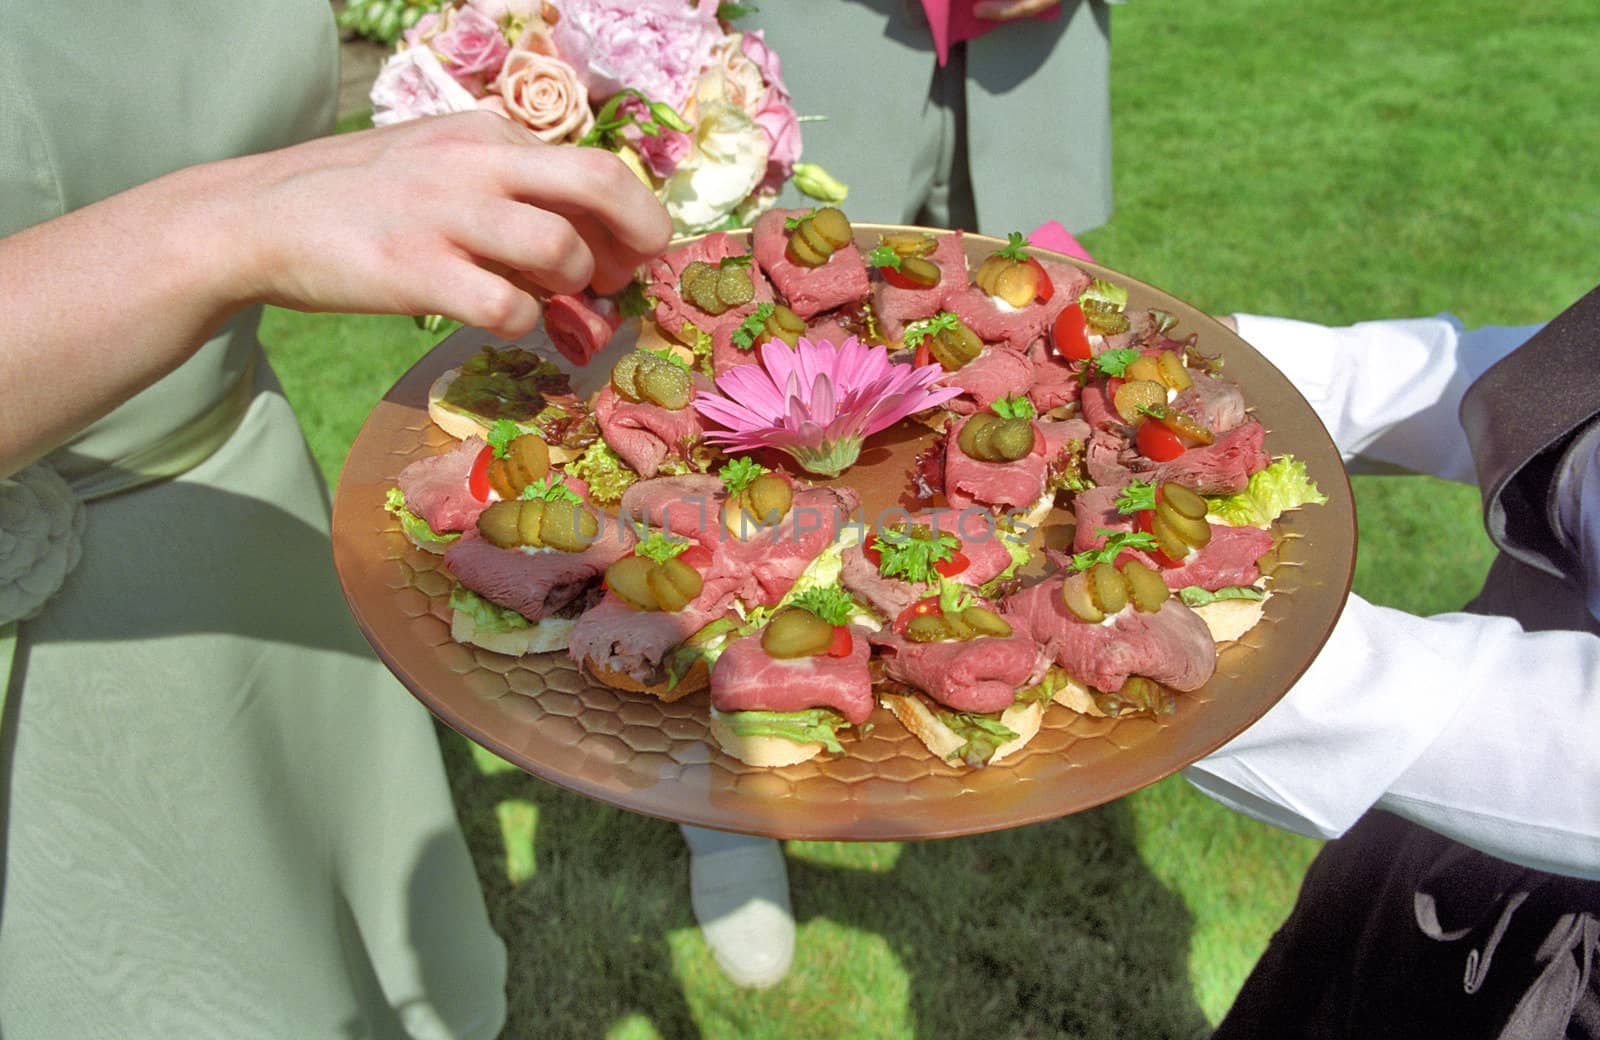 A bridesmaid takes an hors d'oeuvre at an outdoor wedding reception.